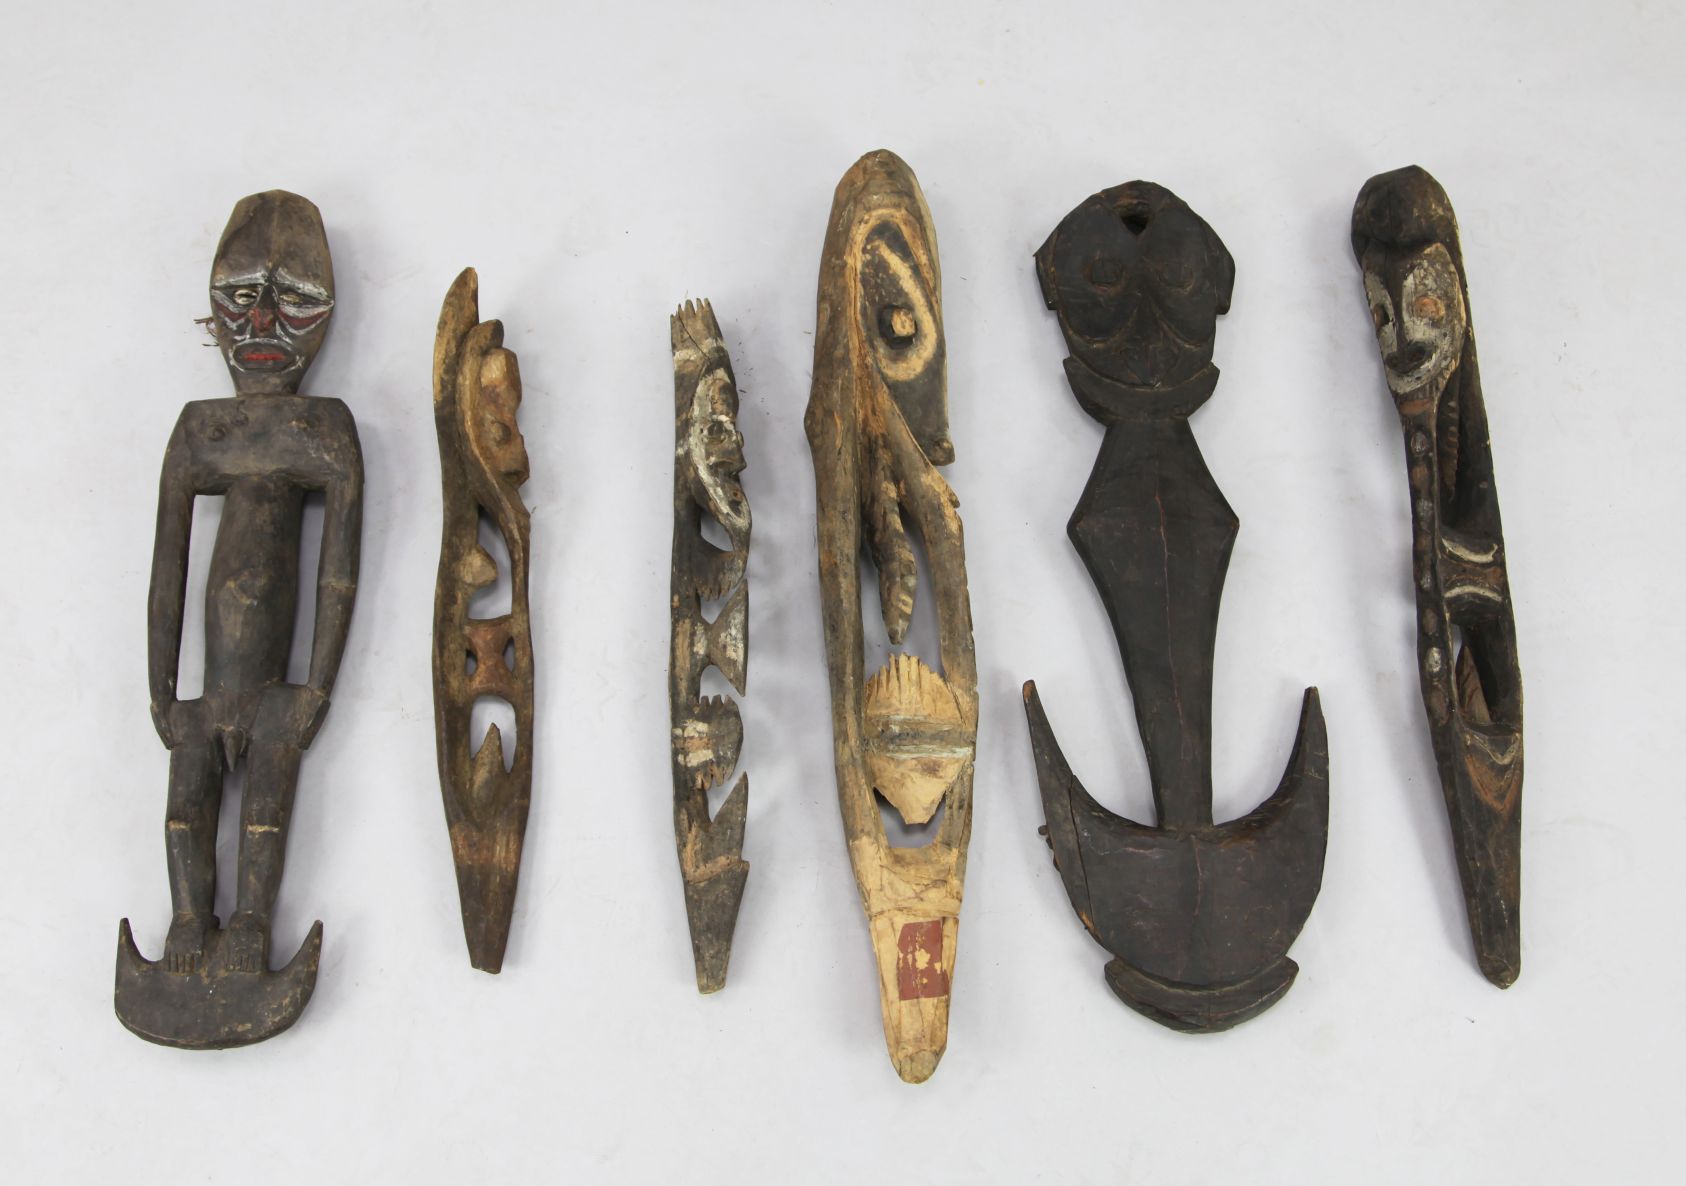 Papua New Guinea Sepik river carvings; the bench incised with masks and stylised figures, with